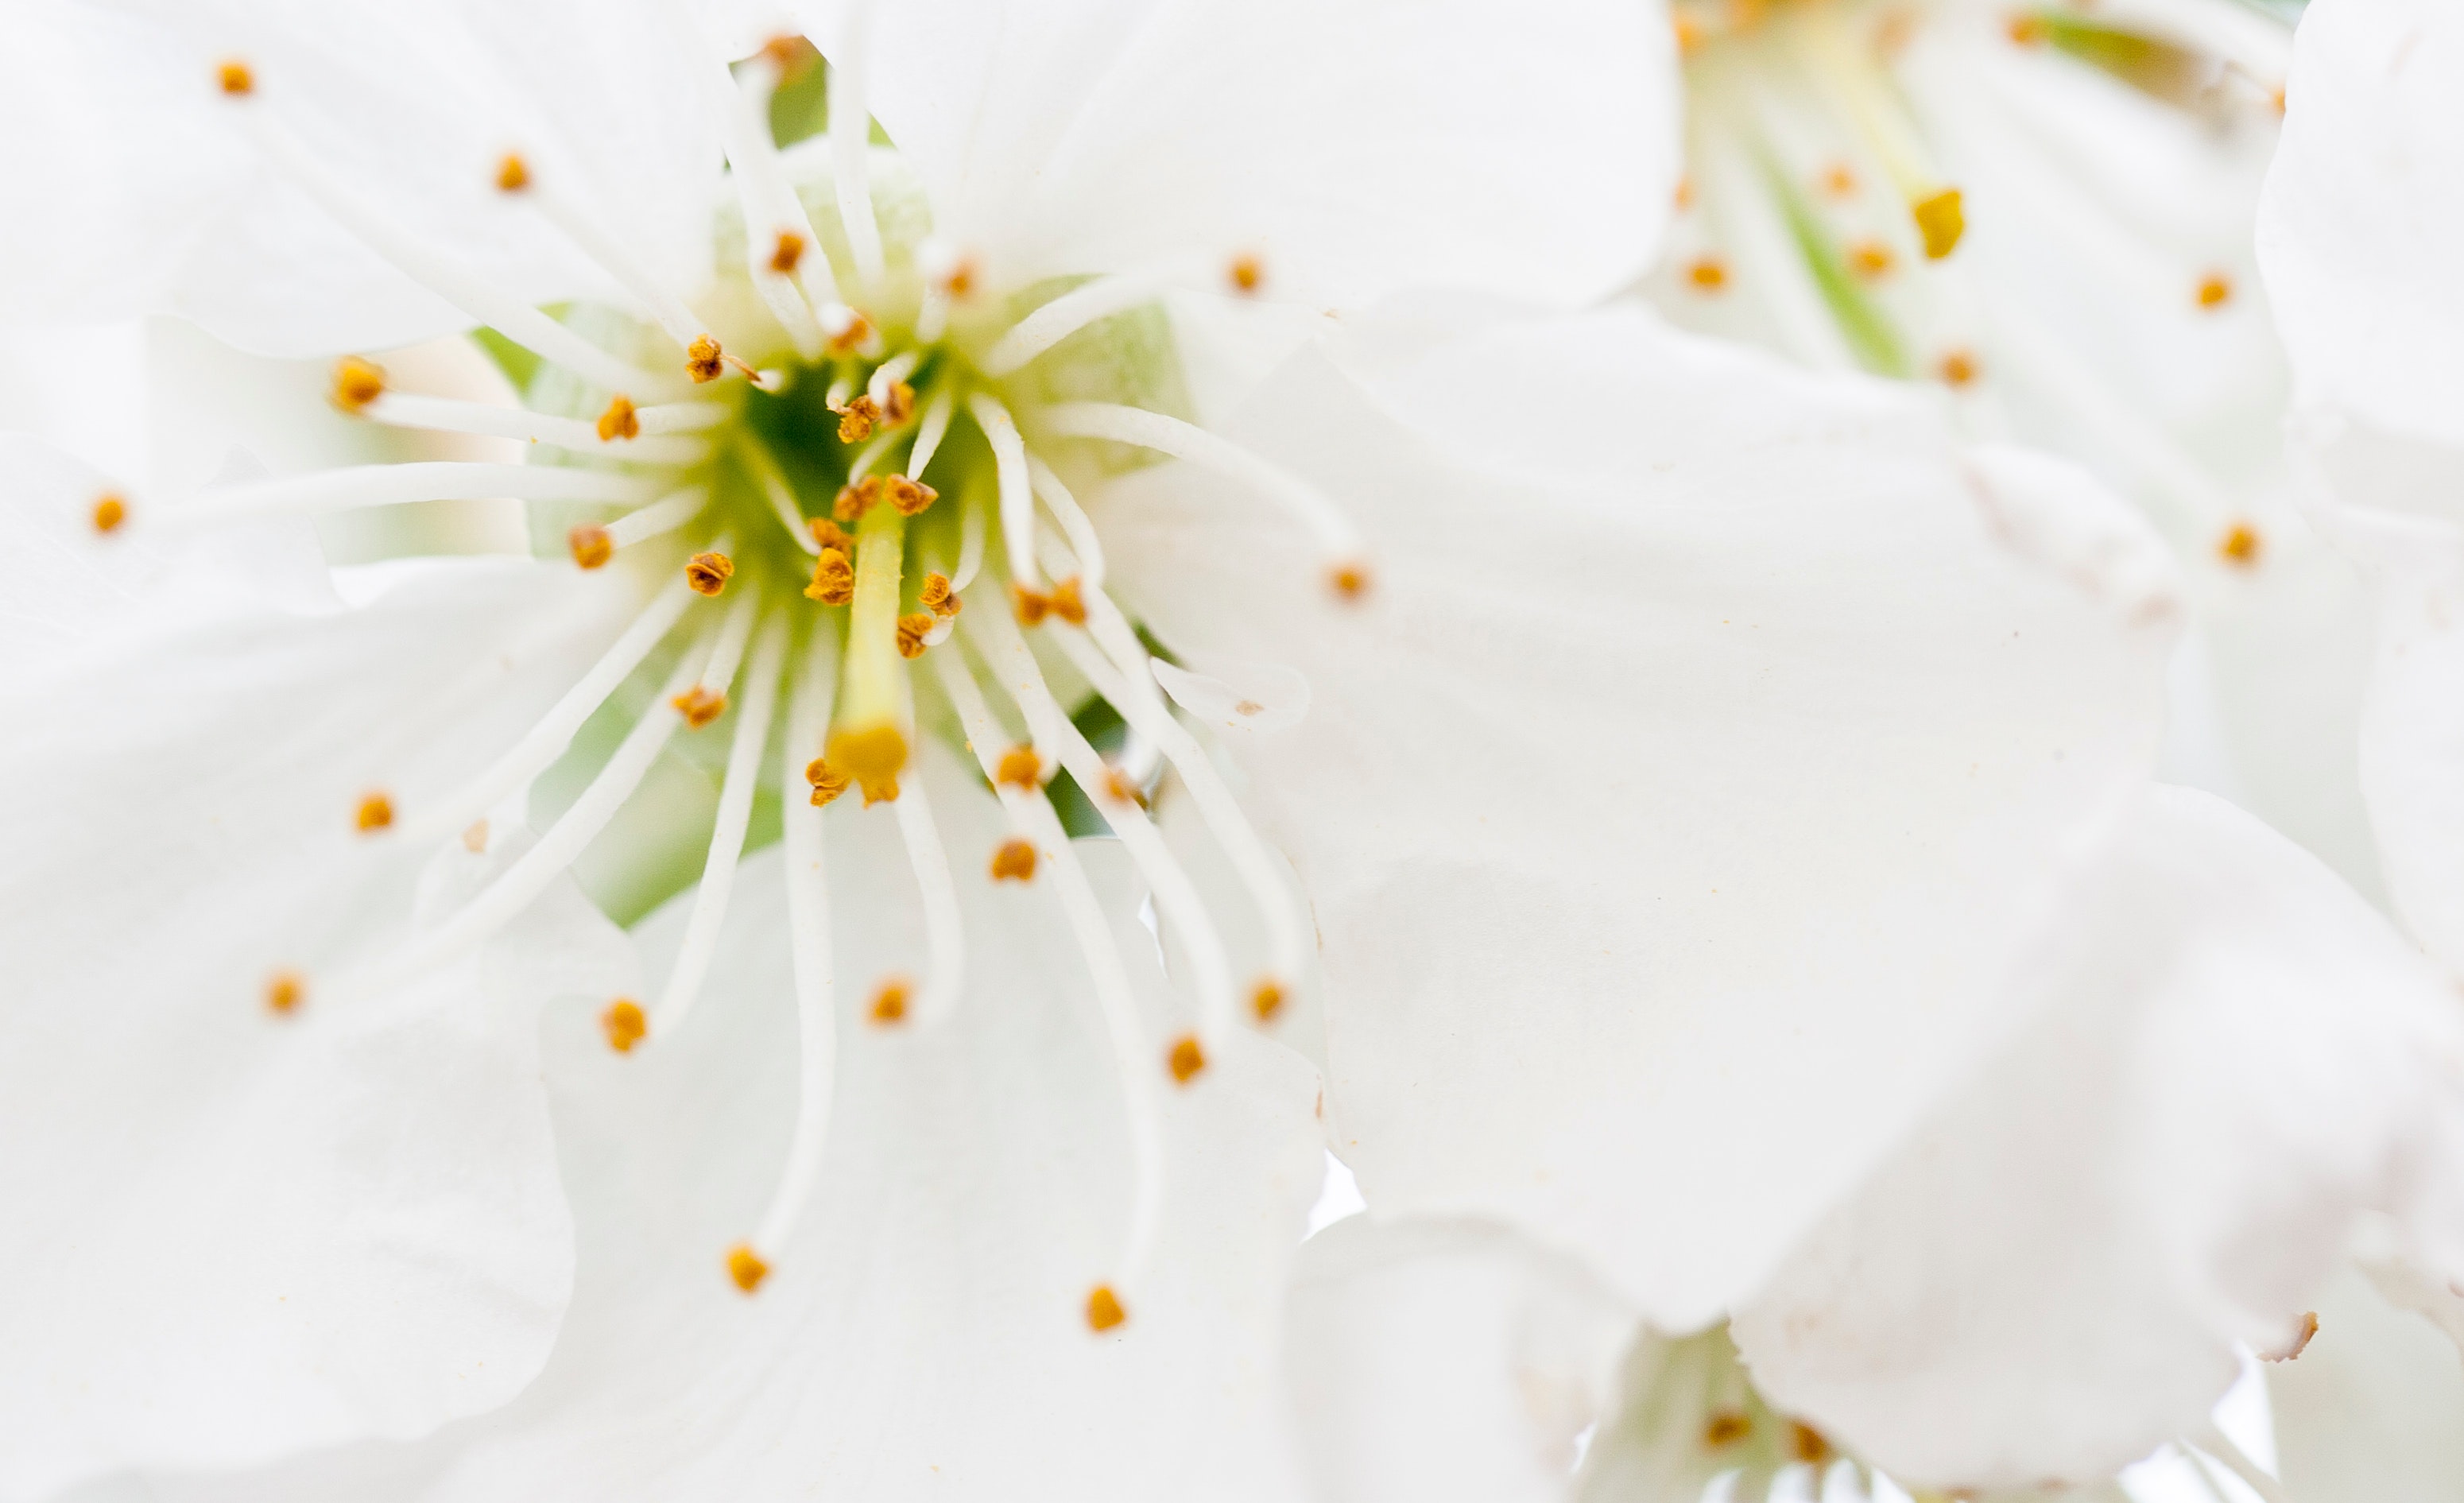 Closeup photography of white petaled flowers